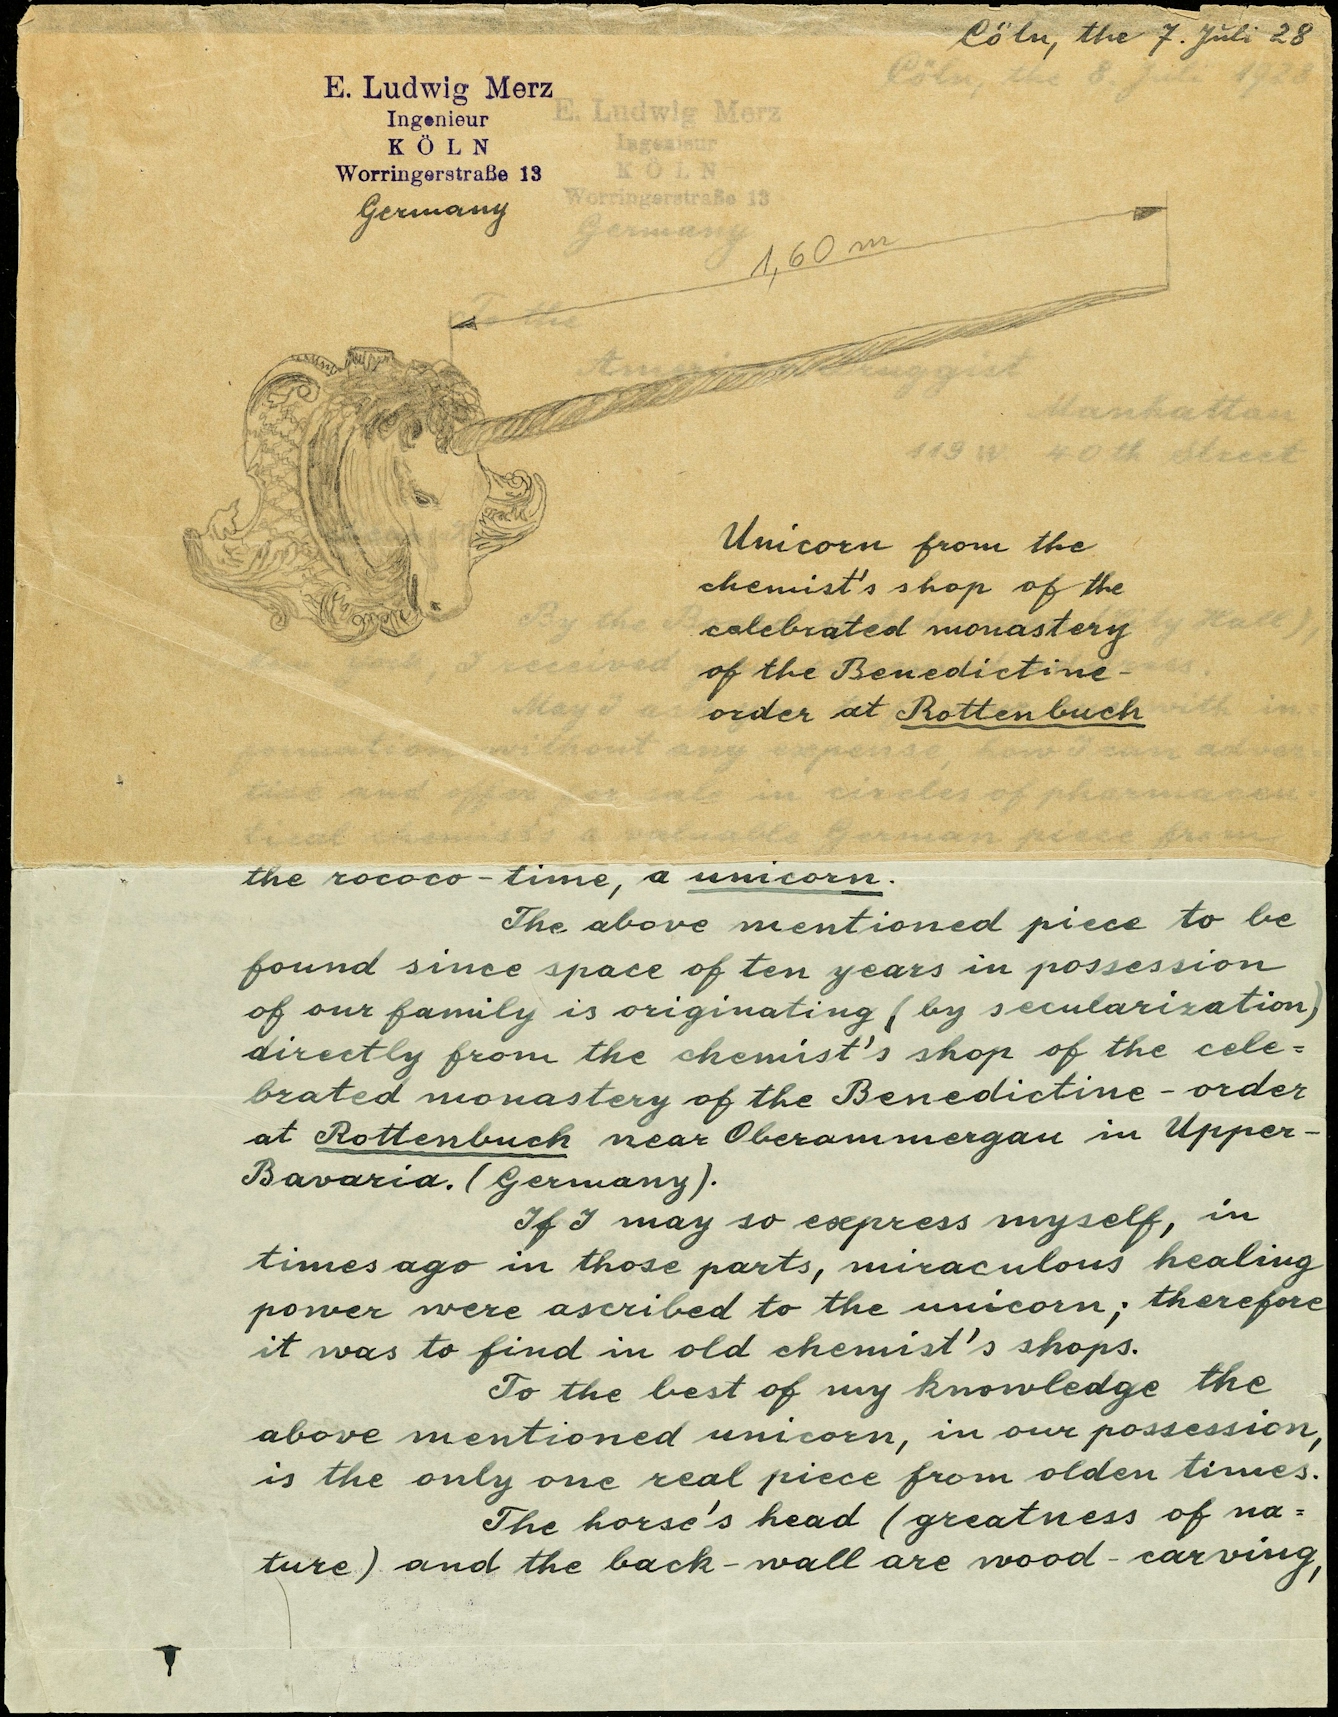 Sketch of a unicorn head on paper headed E. Ludwig Merz and dated 7 July 1928. Letter visible underneath with cursive handwriting discussing the provenance of the piece.